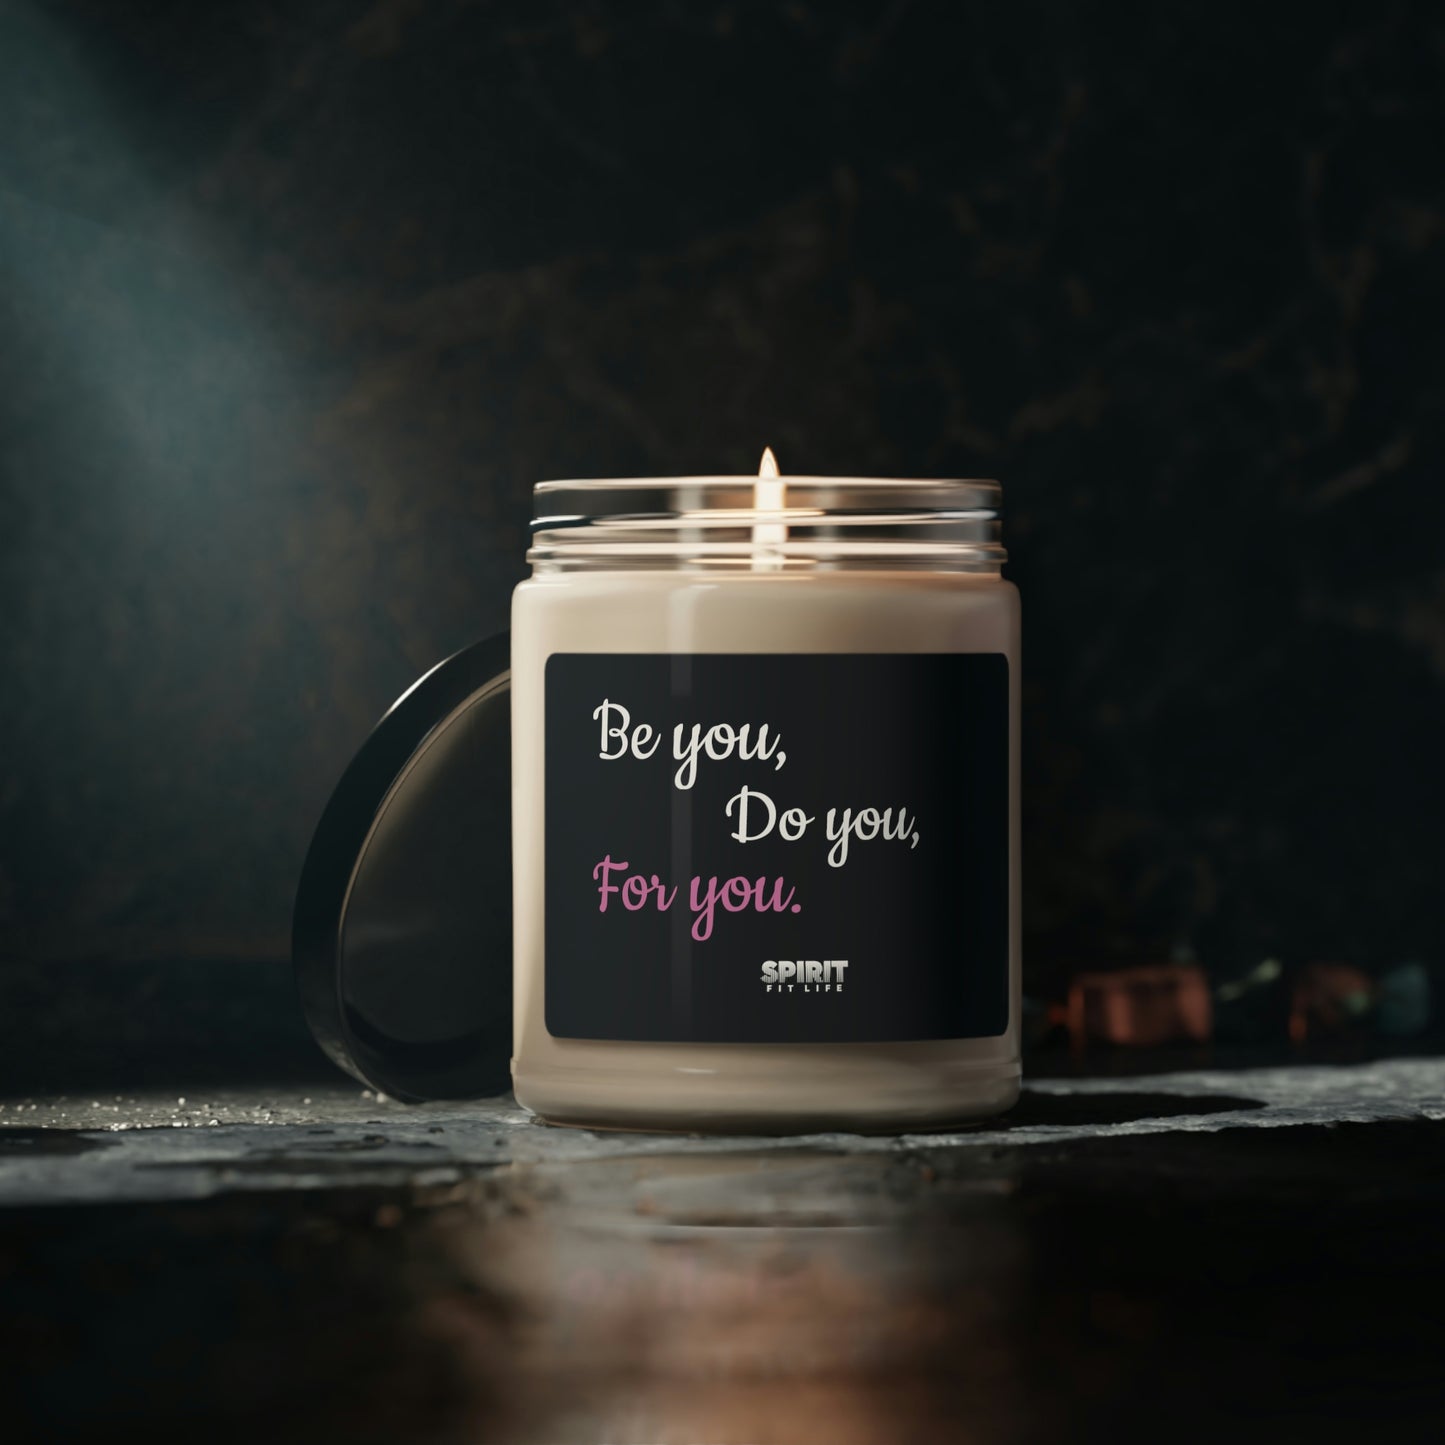 Be You. Do You. For You Scented Soy Candle, 9oz